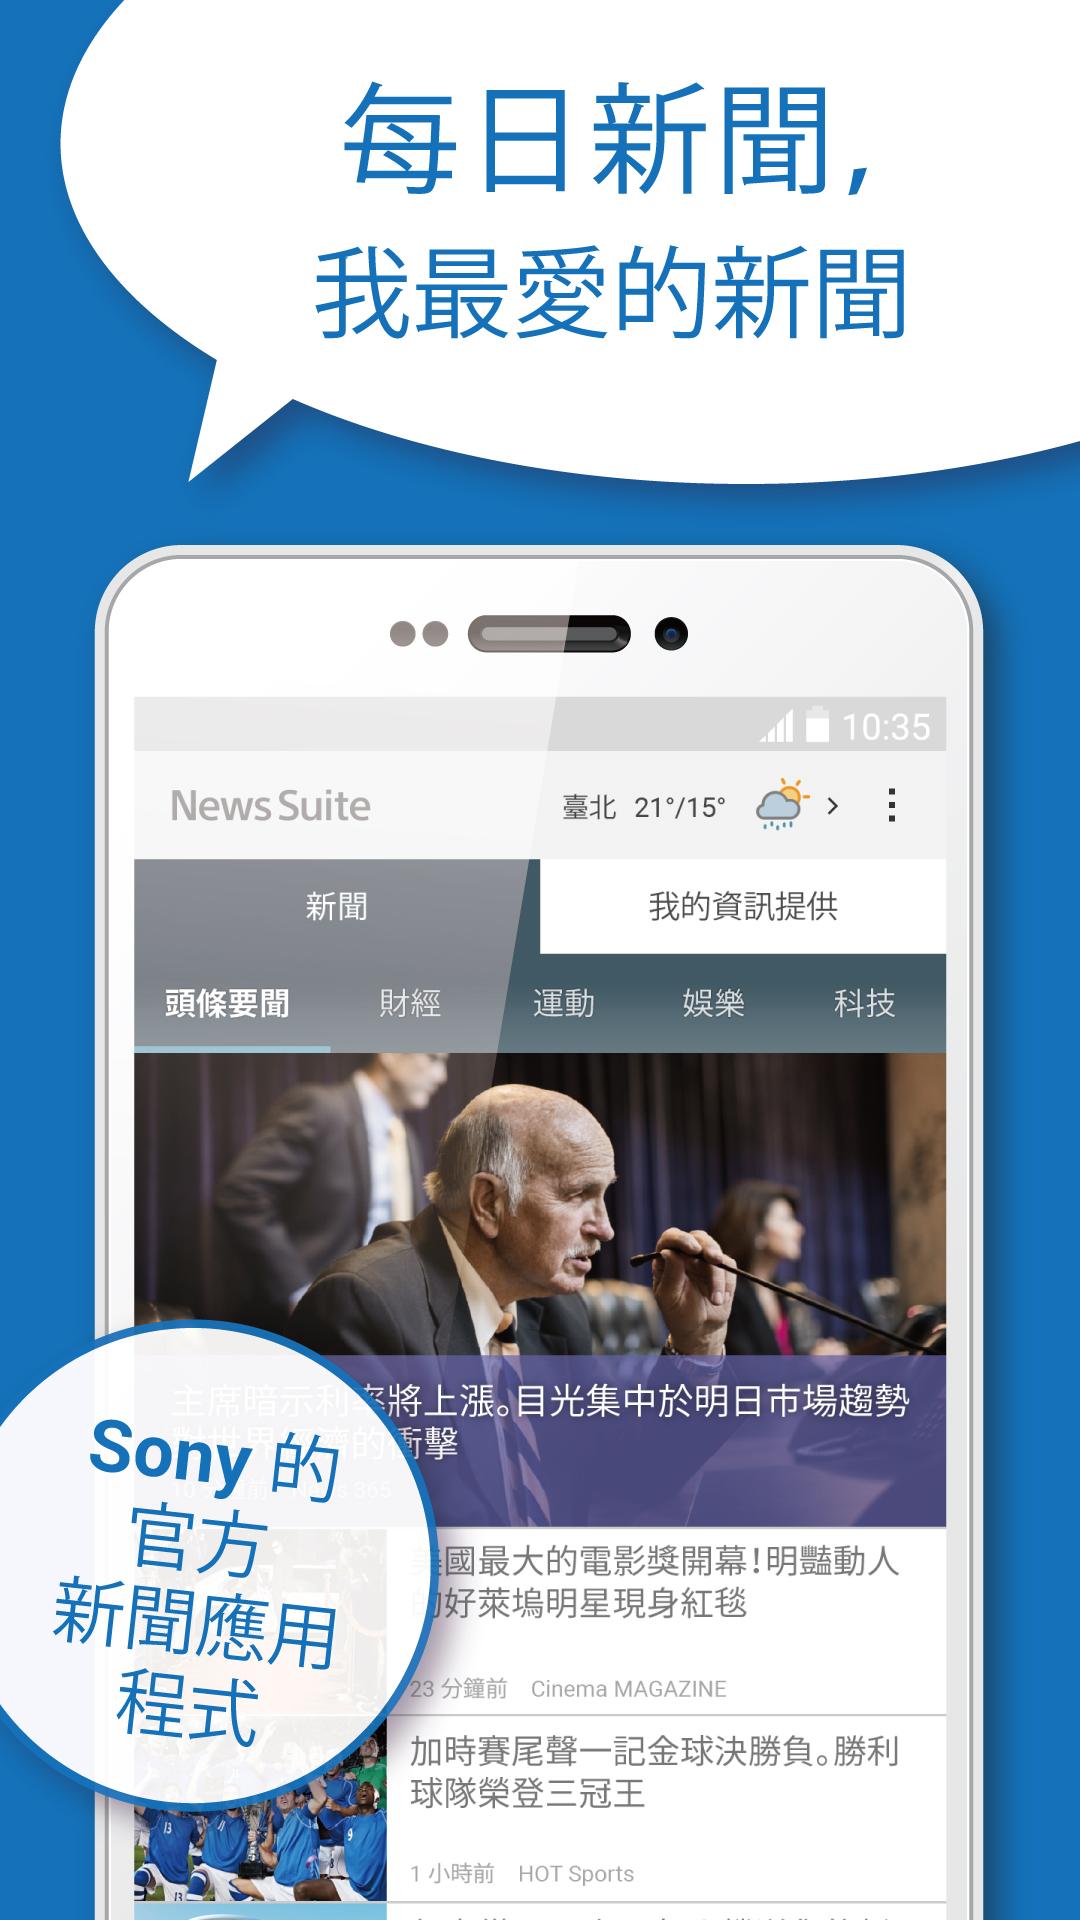 Android application News Suite by Sony screenshort